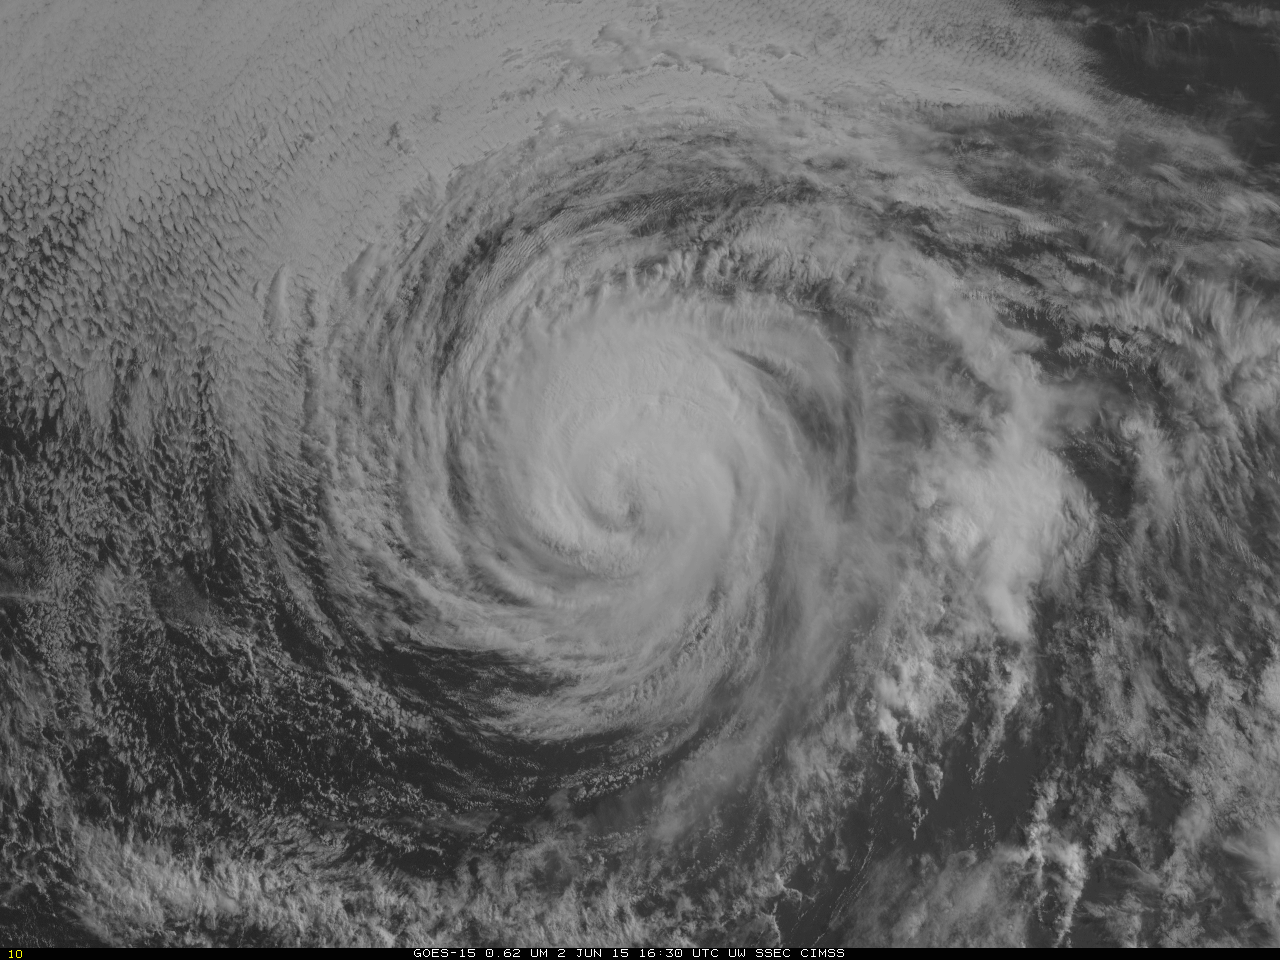 GOES-15 Imager 0.64 µm visible channel images (click to play animation)